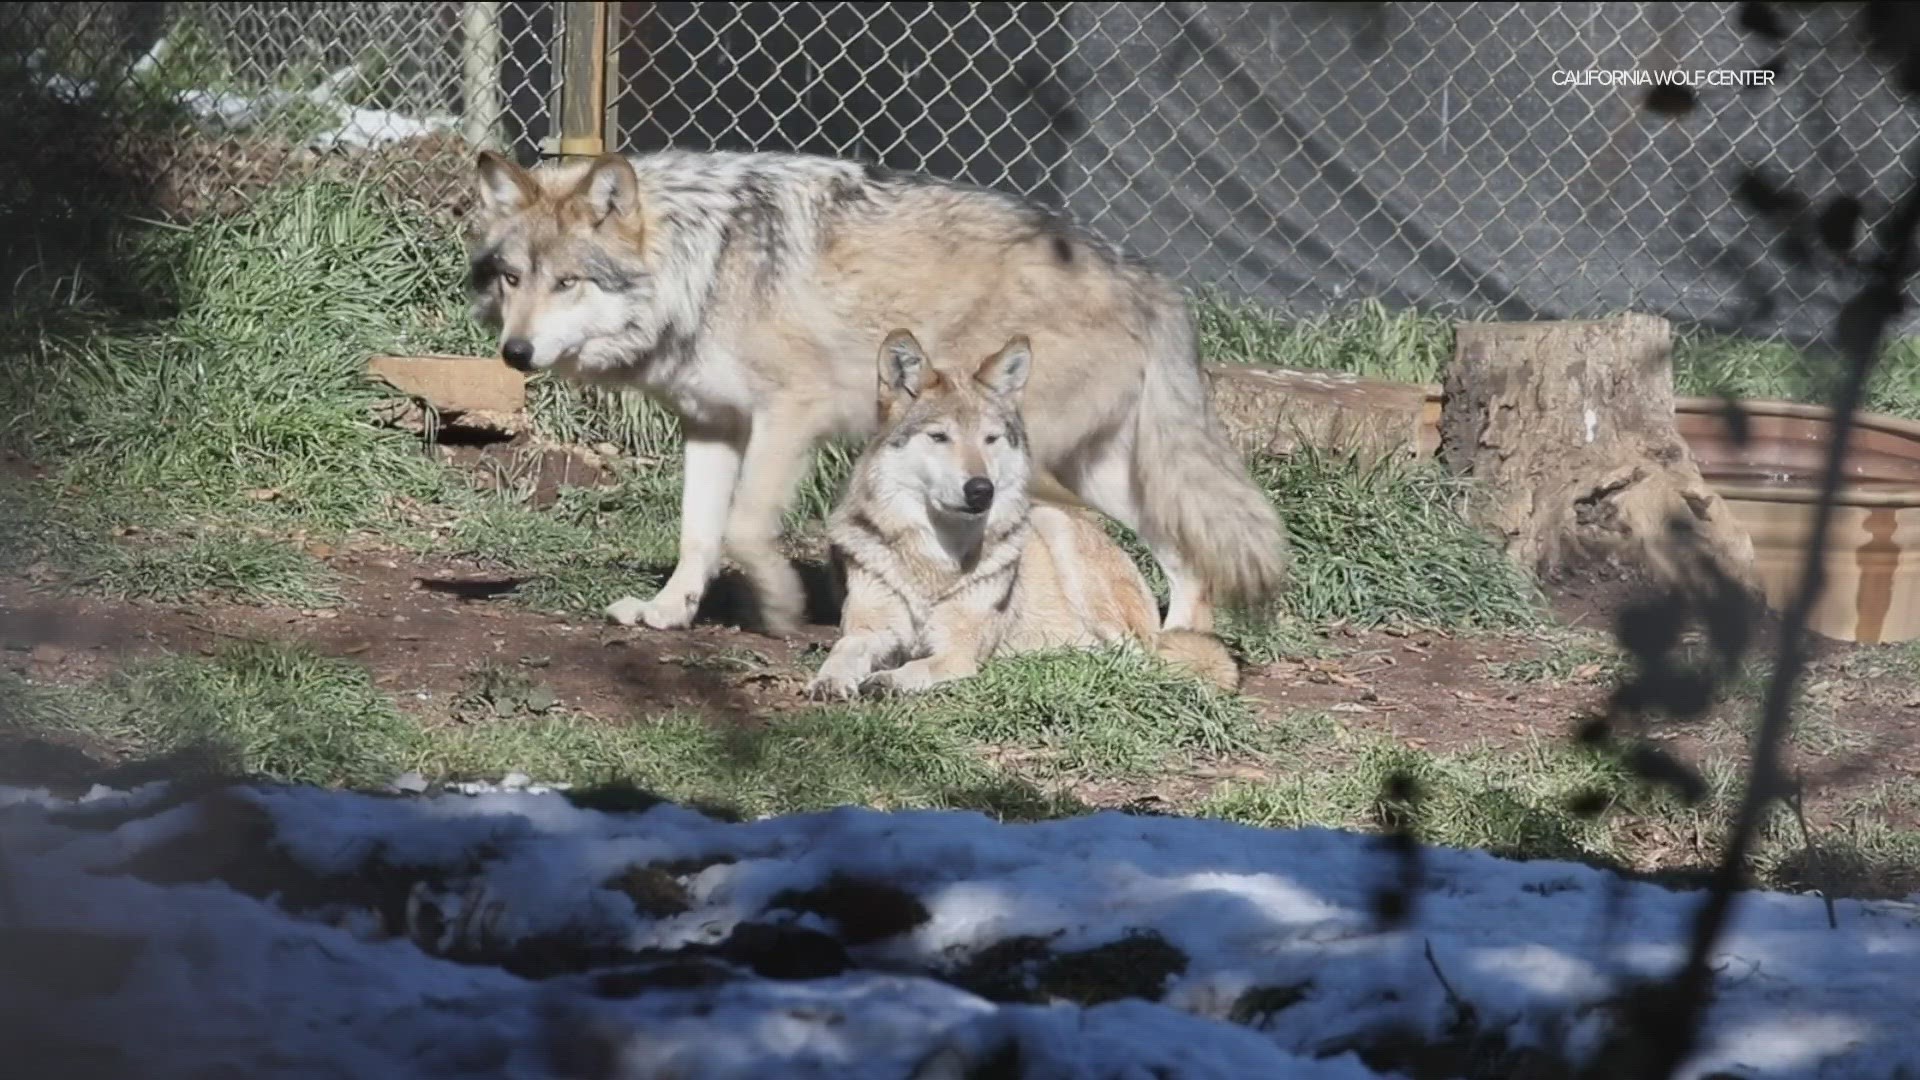 The California Wolf Center in Julian has been part of the Species Survival Plan, reintroducing wolves bred in captivity into the wild across New Mexico and Arizona.